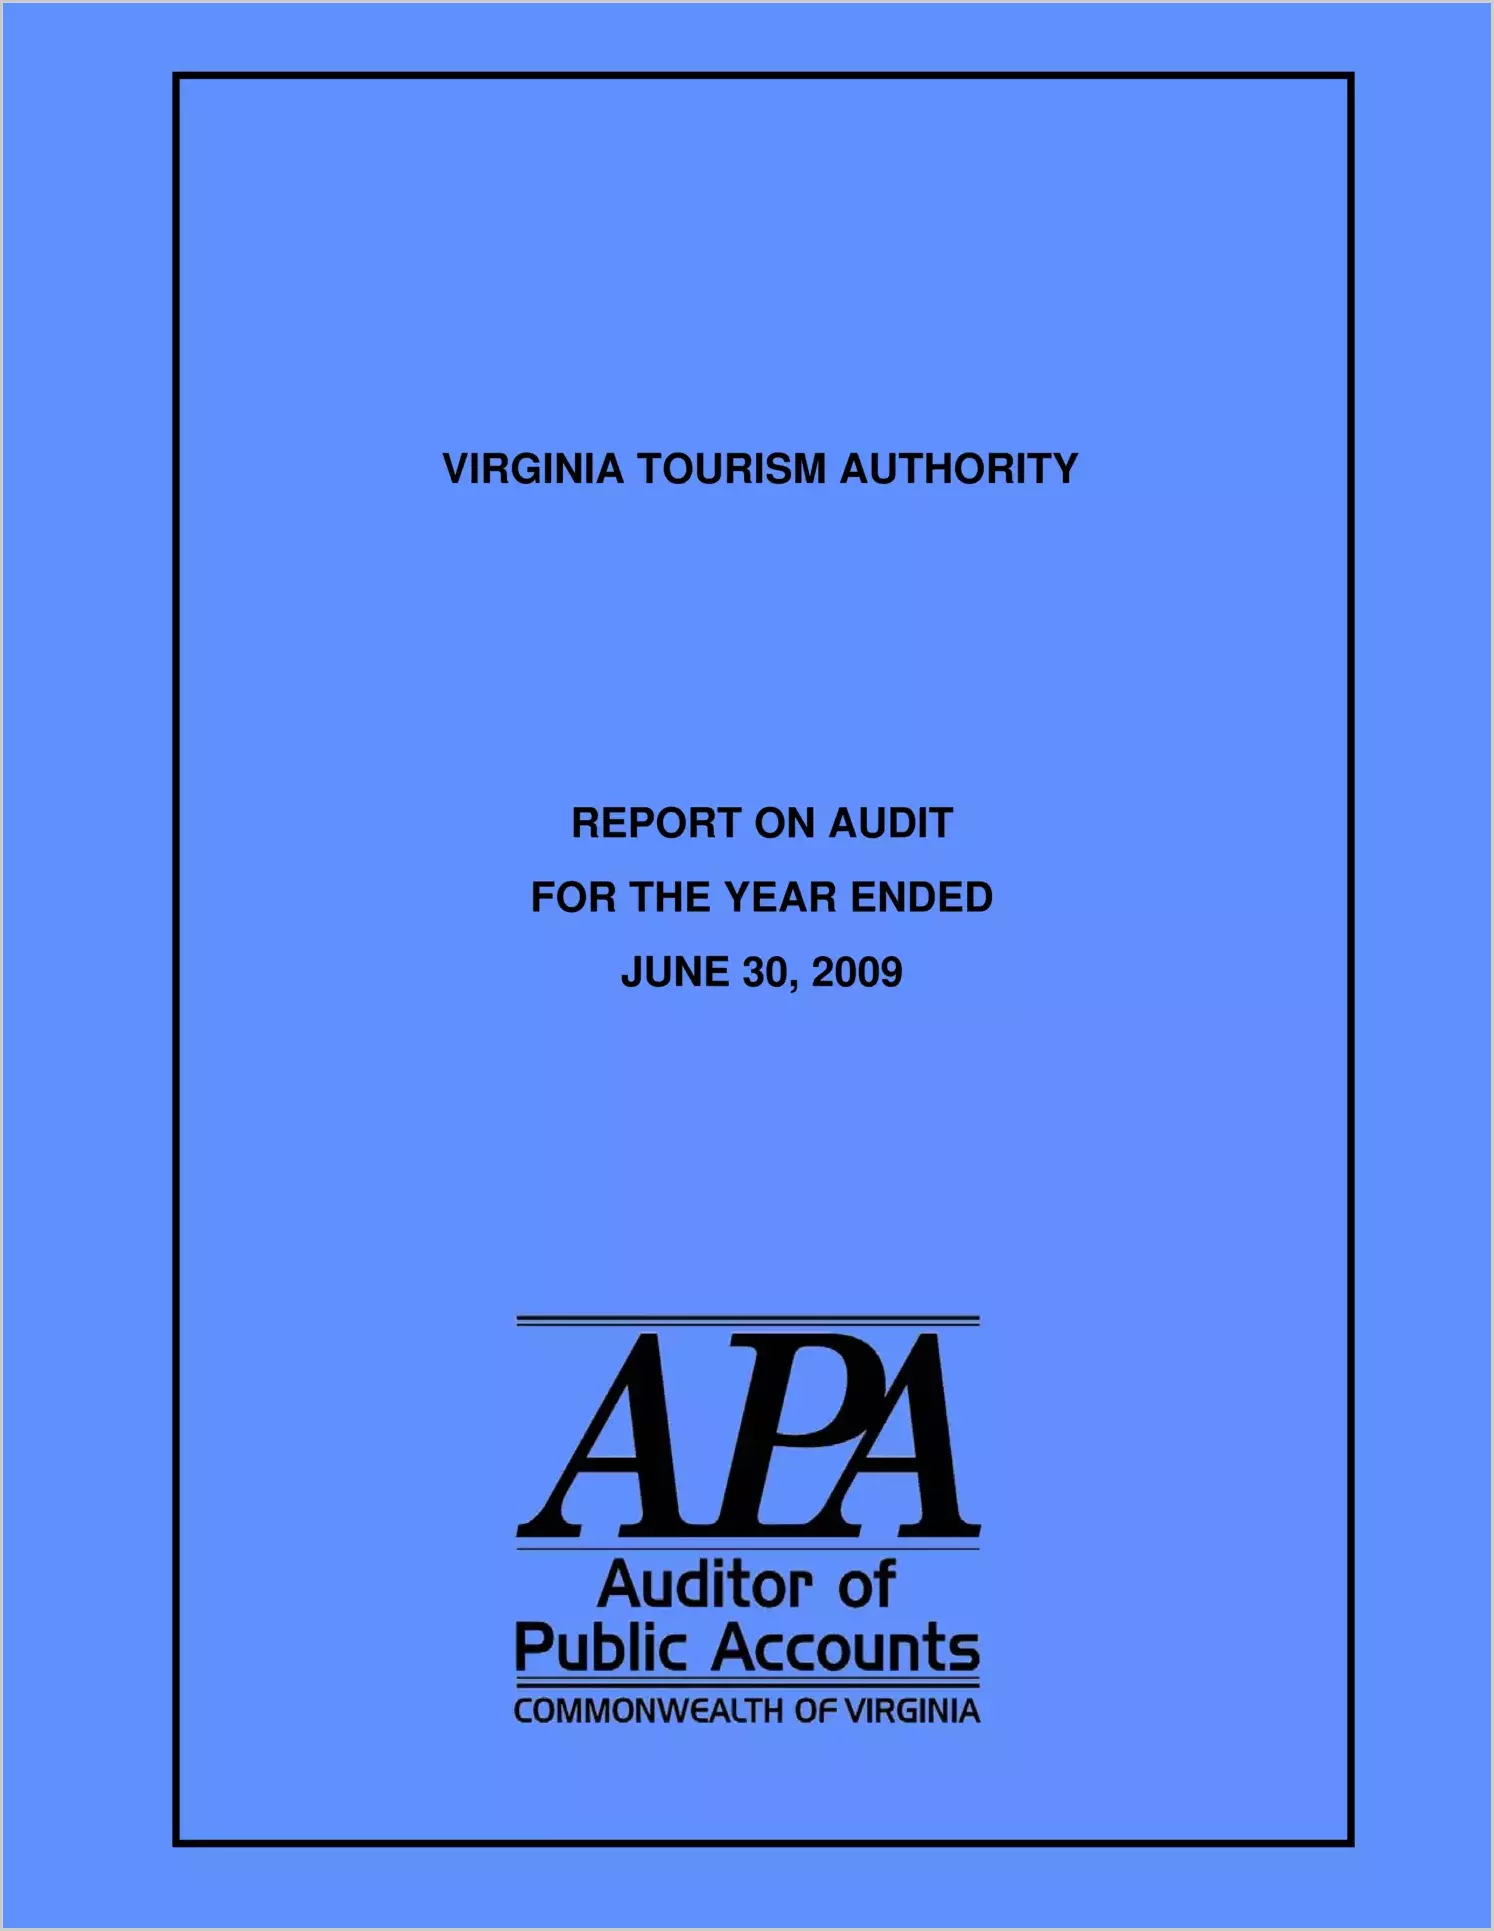 Virginia Tourism Authority for the year ended June 30, 2009